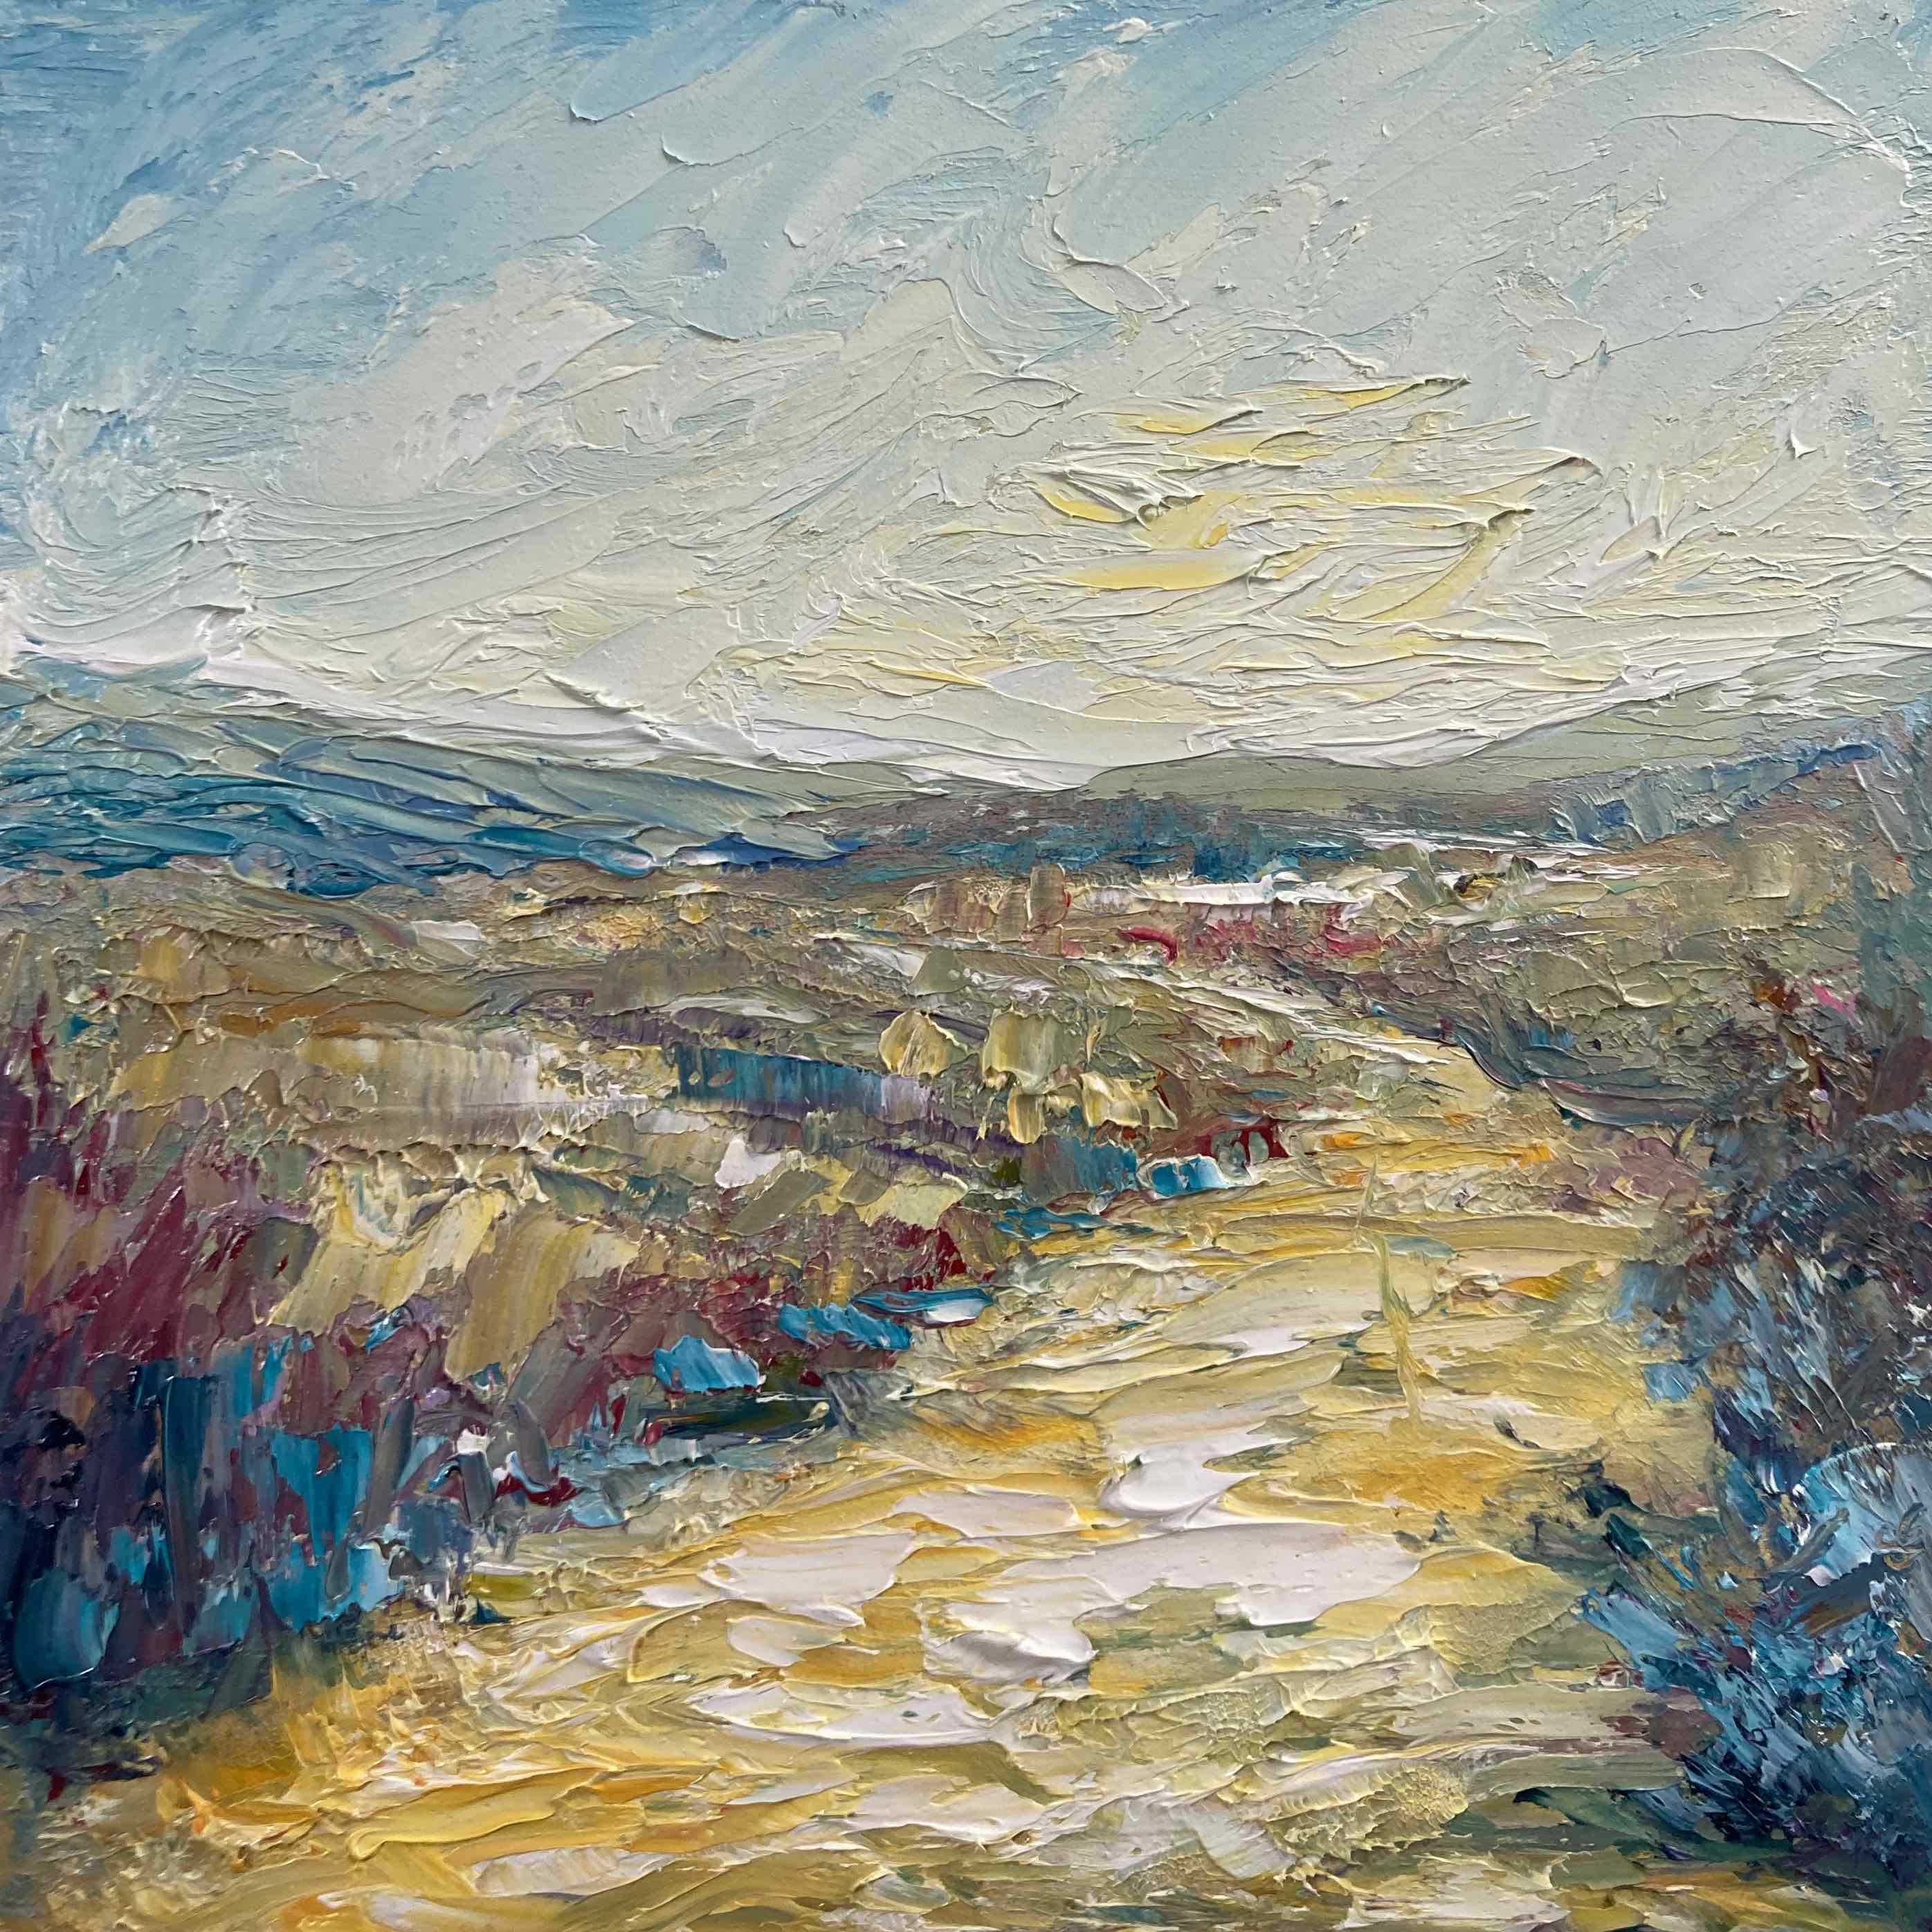 Blustery Impressionistic oil painting of a California Sierra Foothills landscape by Shannon Grissom